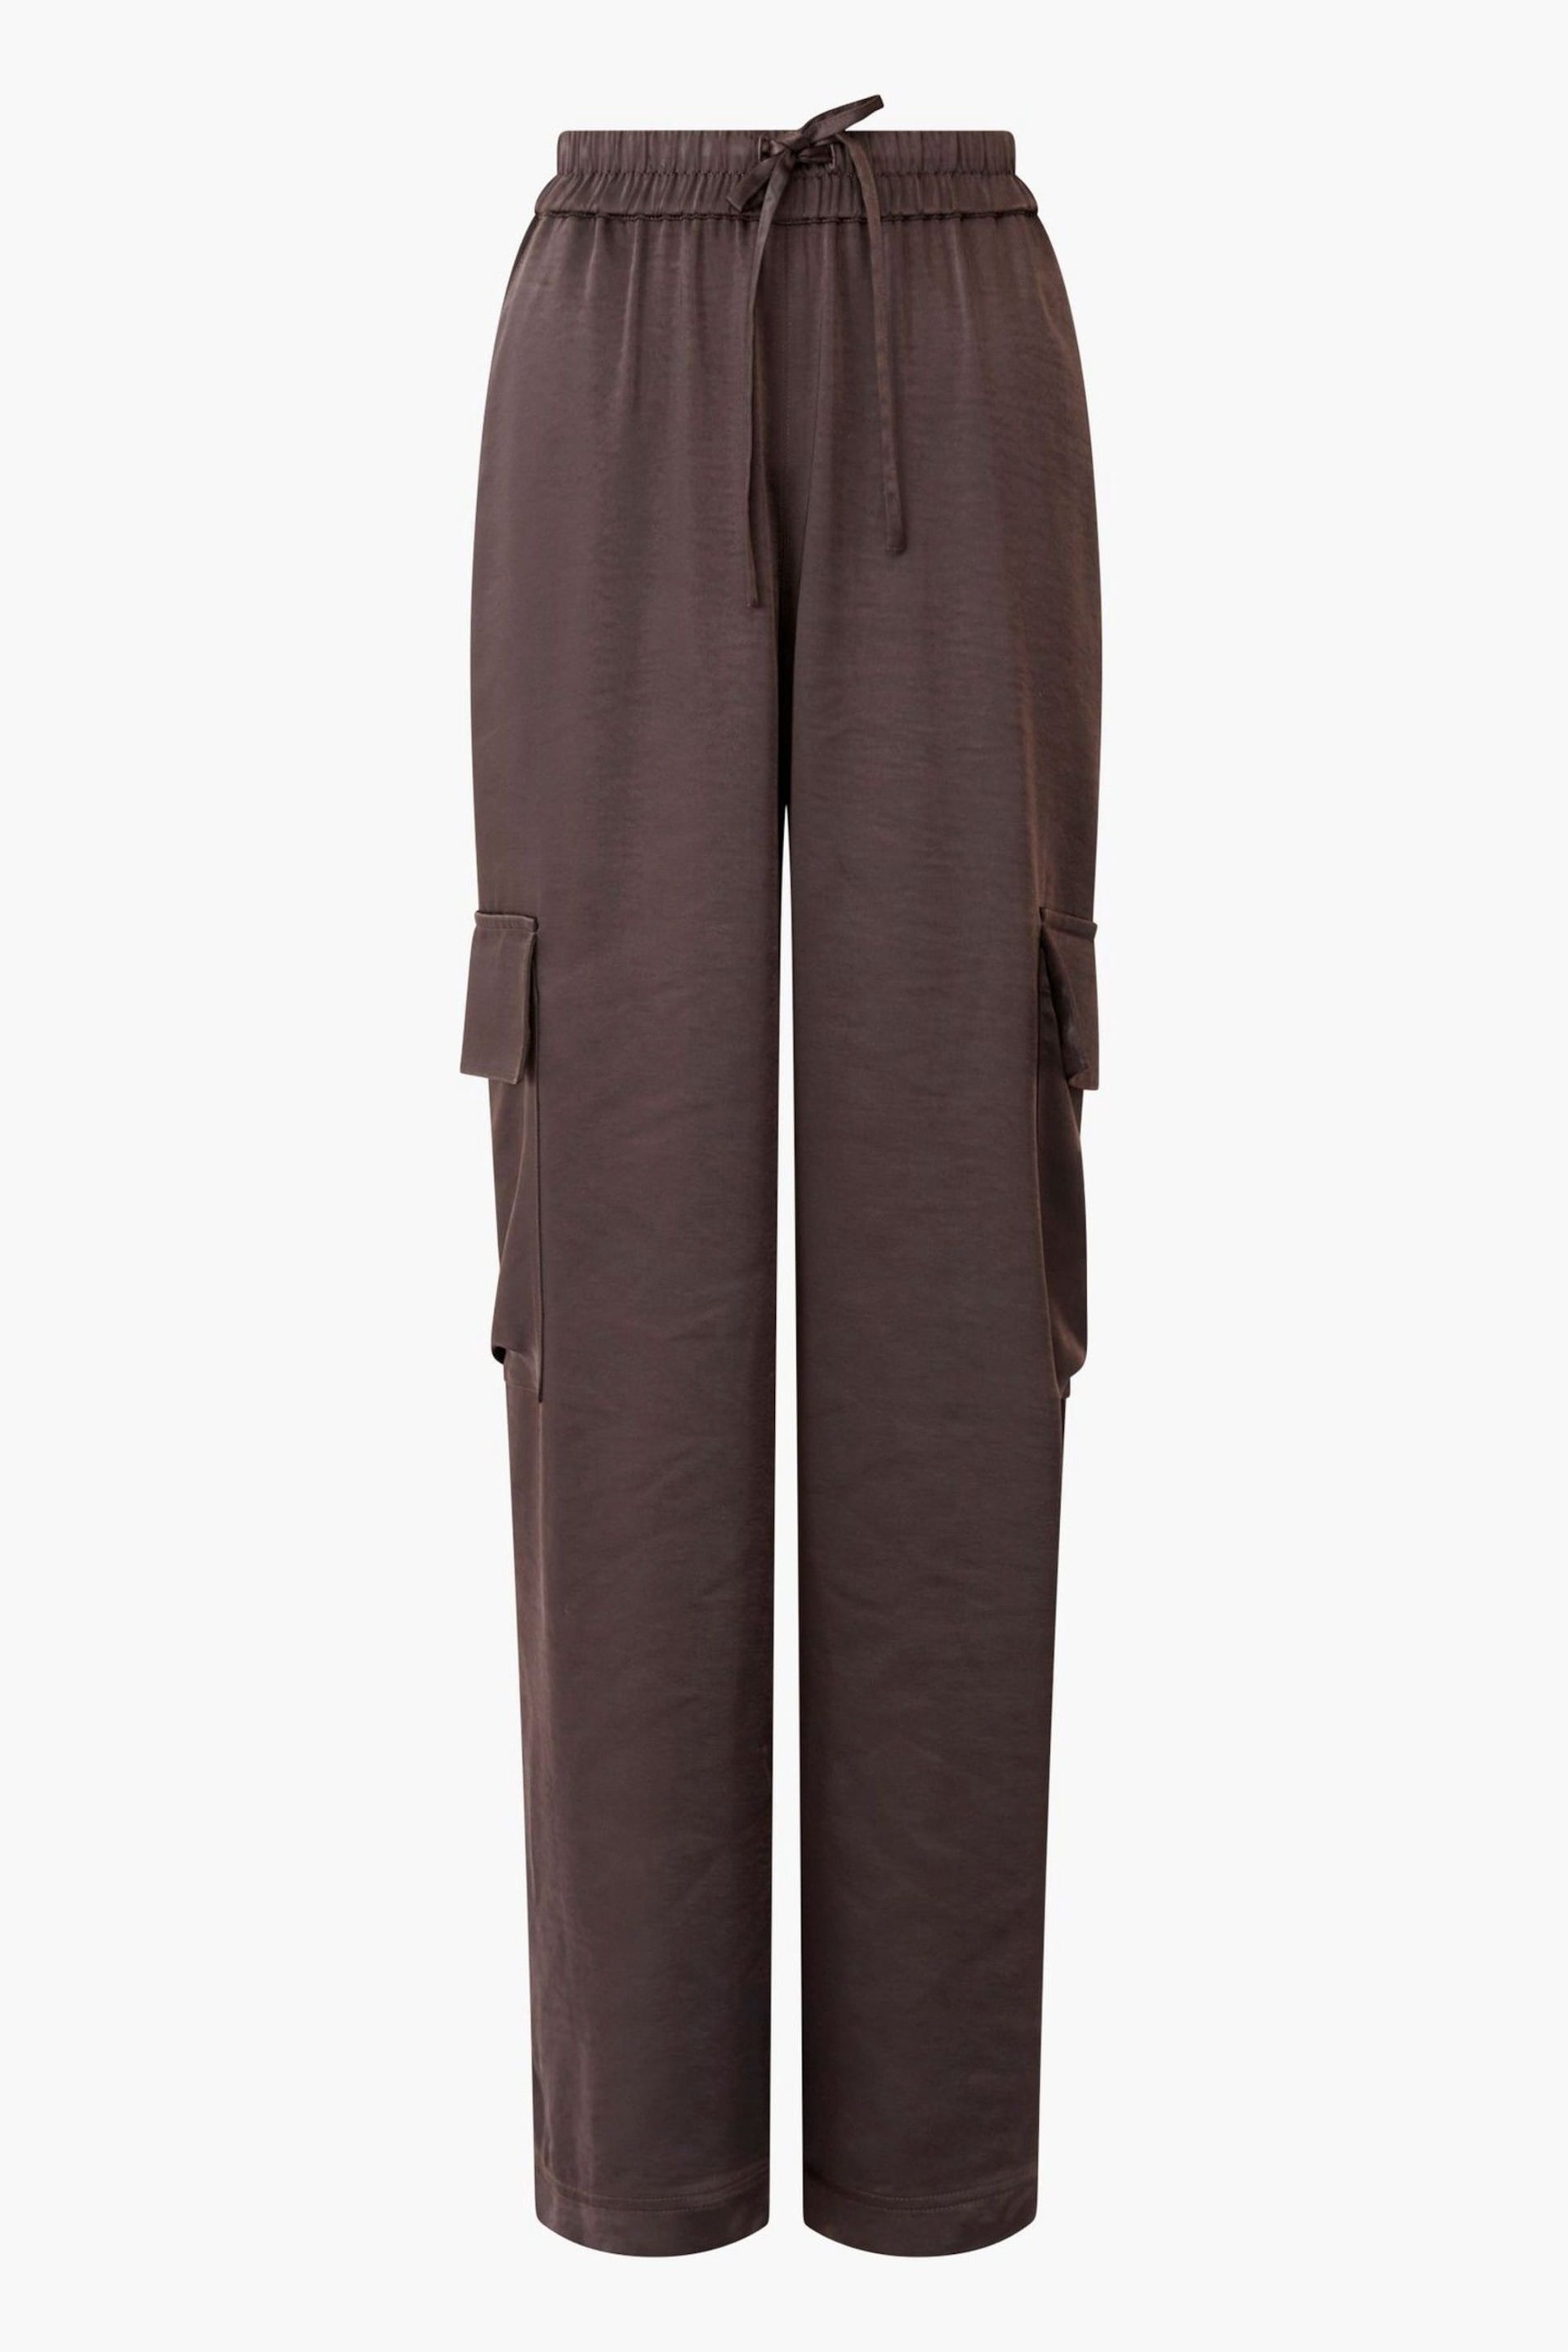 French Connection Chloetta Cargo Trousers - Image 4 of 4